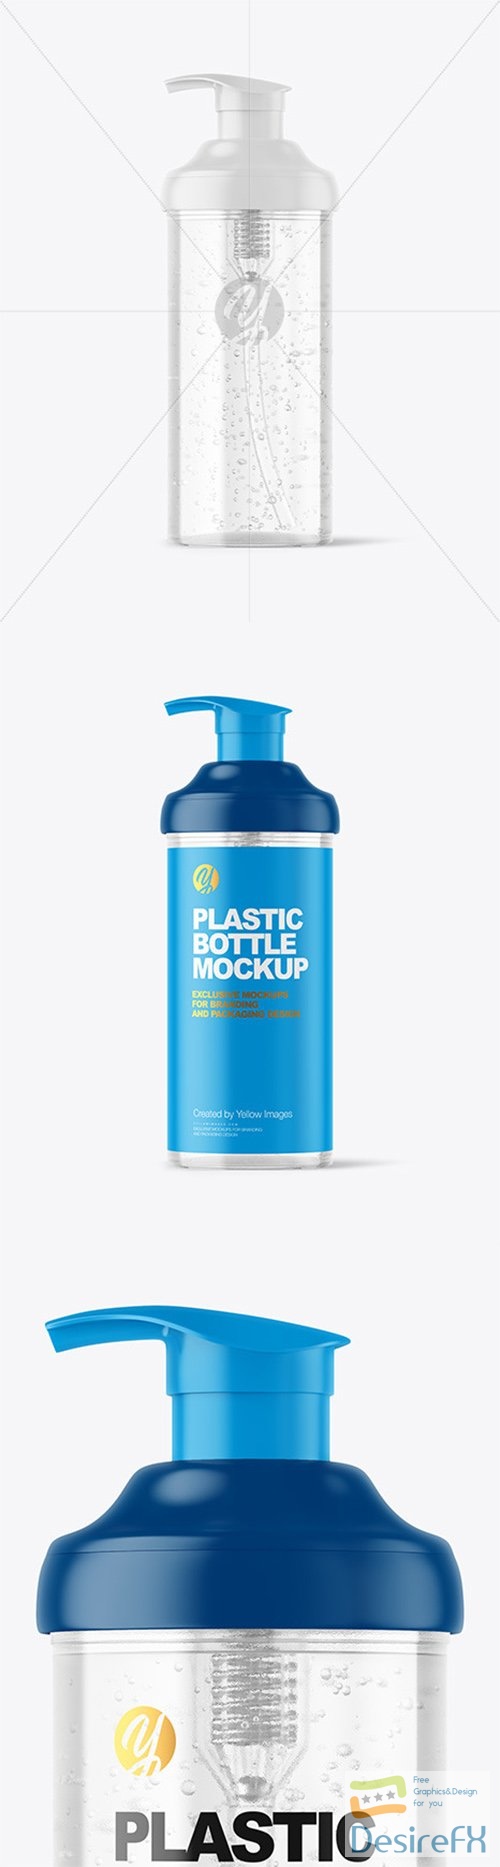 Clear Cosmetic Bottle with Pump Mockup 82228 TIF